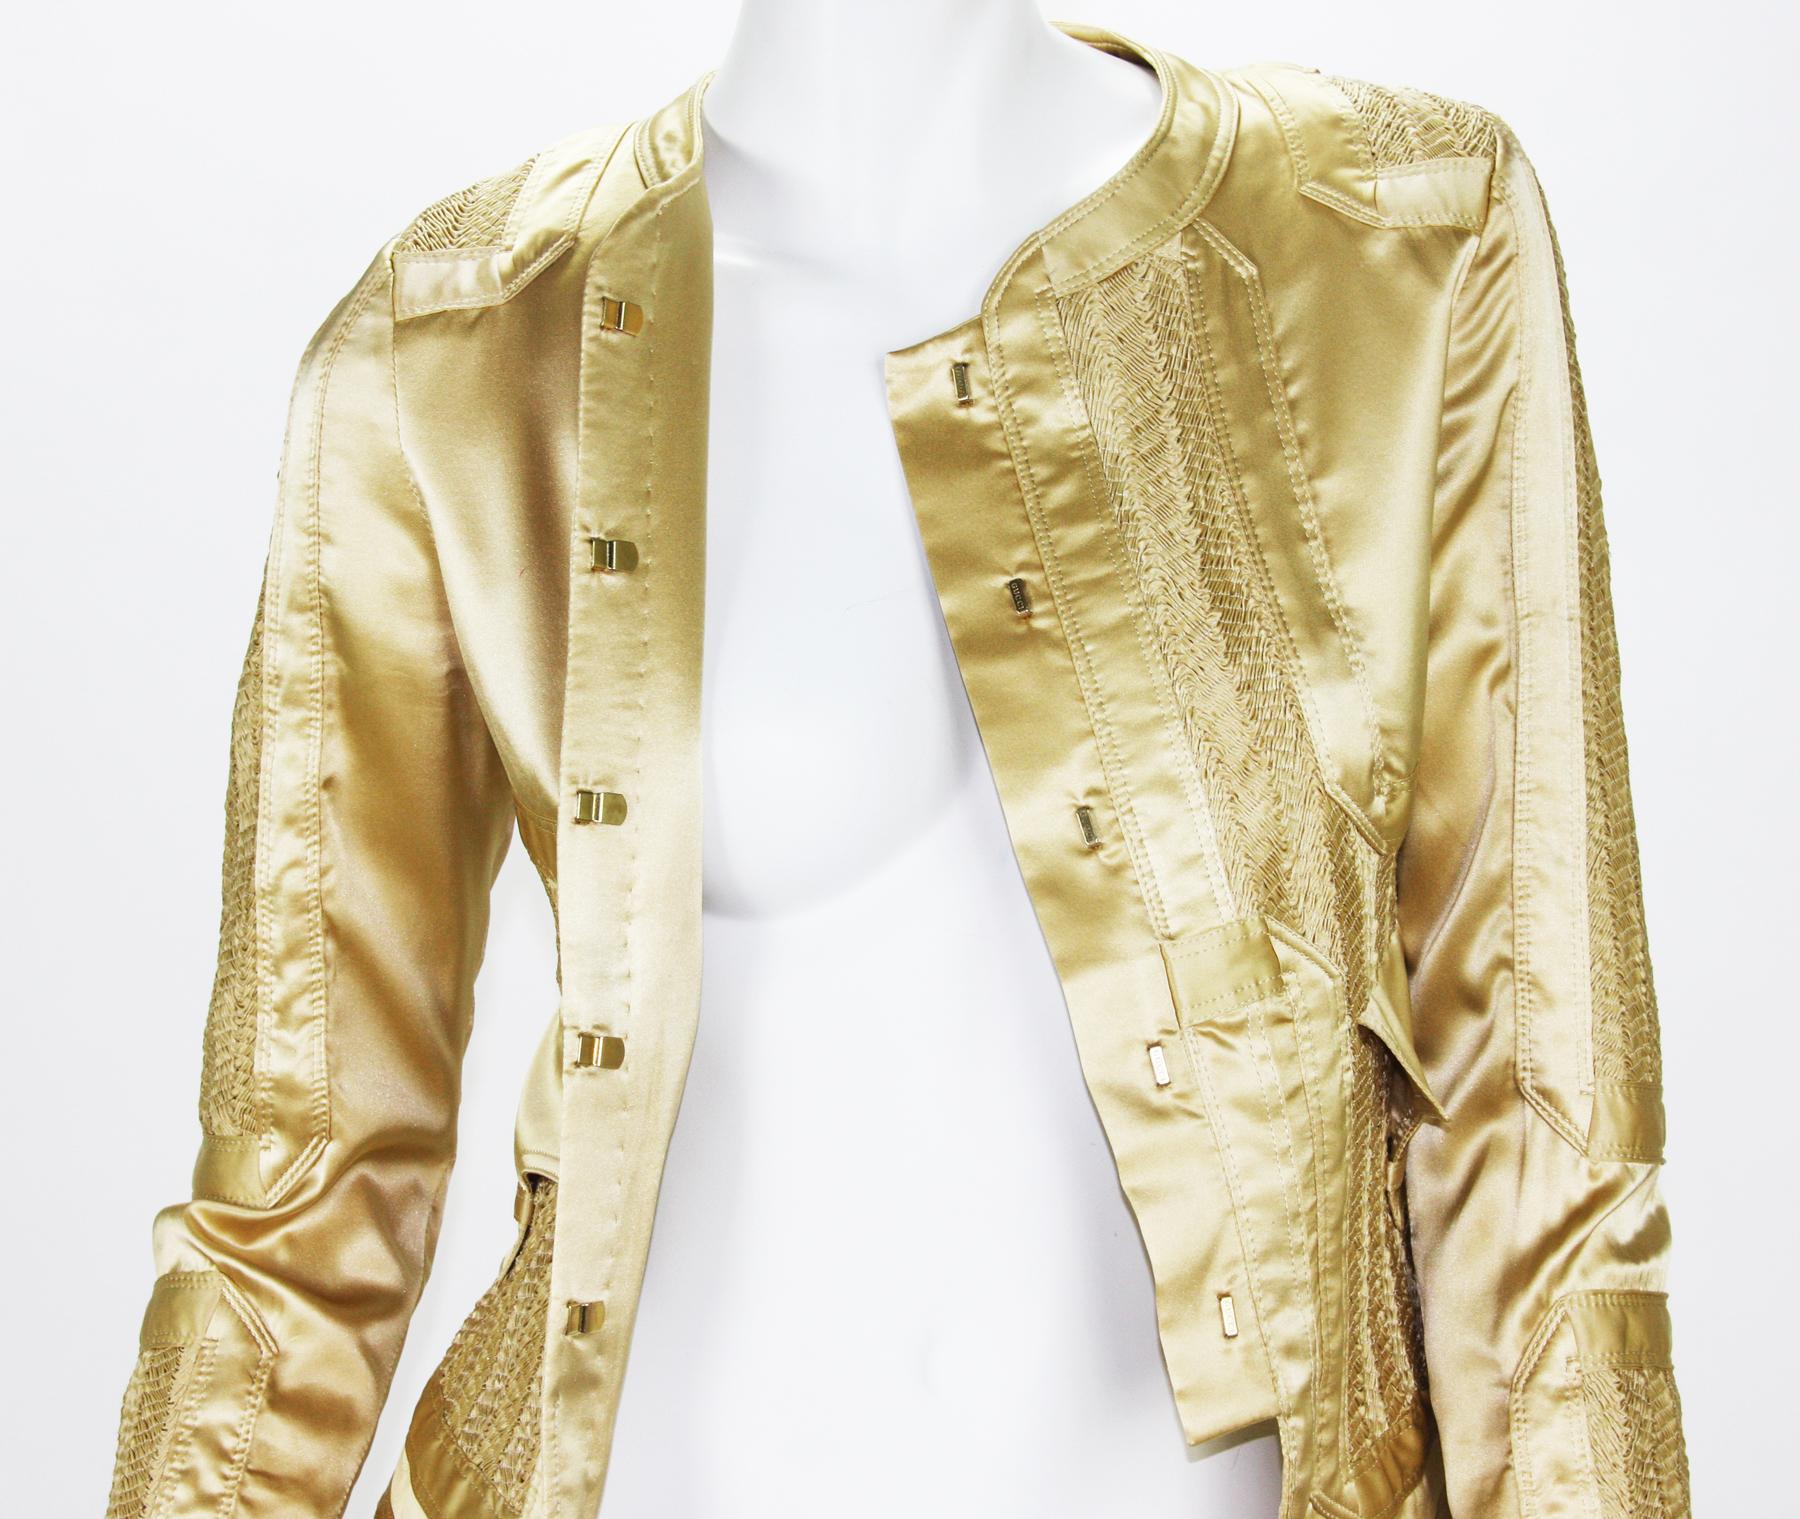 Tom Ford for Gucci 2004 Collection Gold Silk Limited Edition Jackets It.40  US 4 1